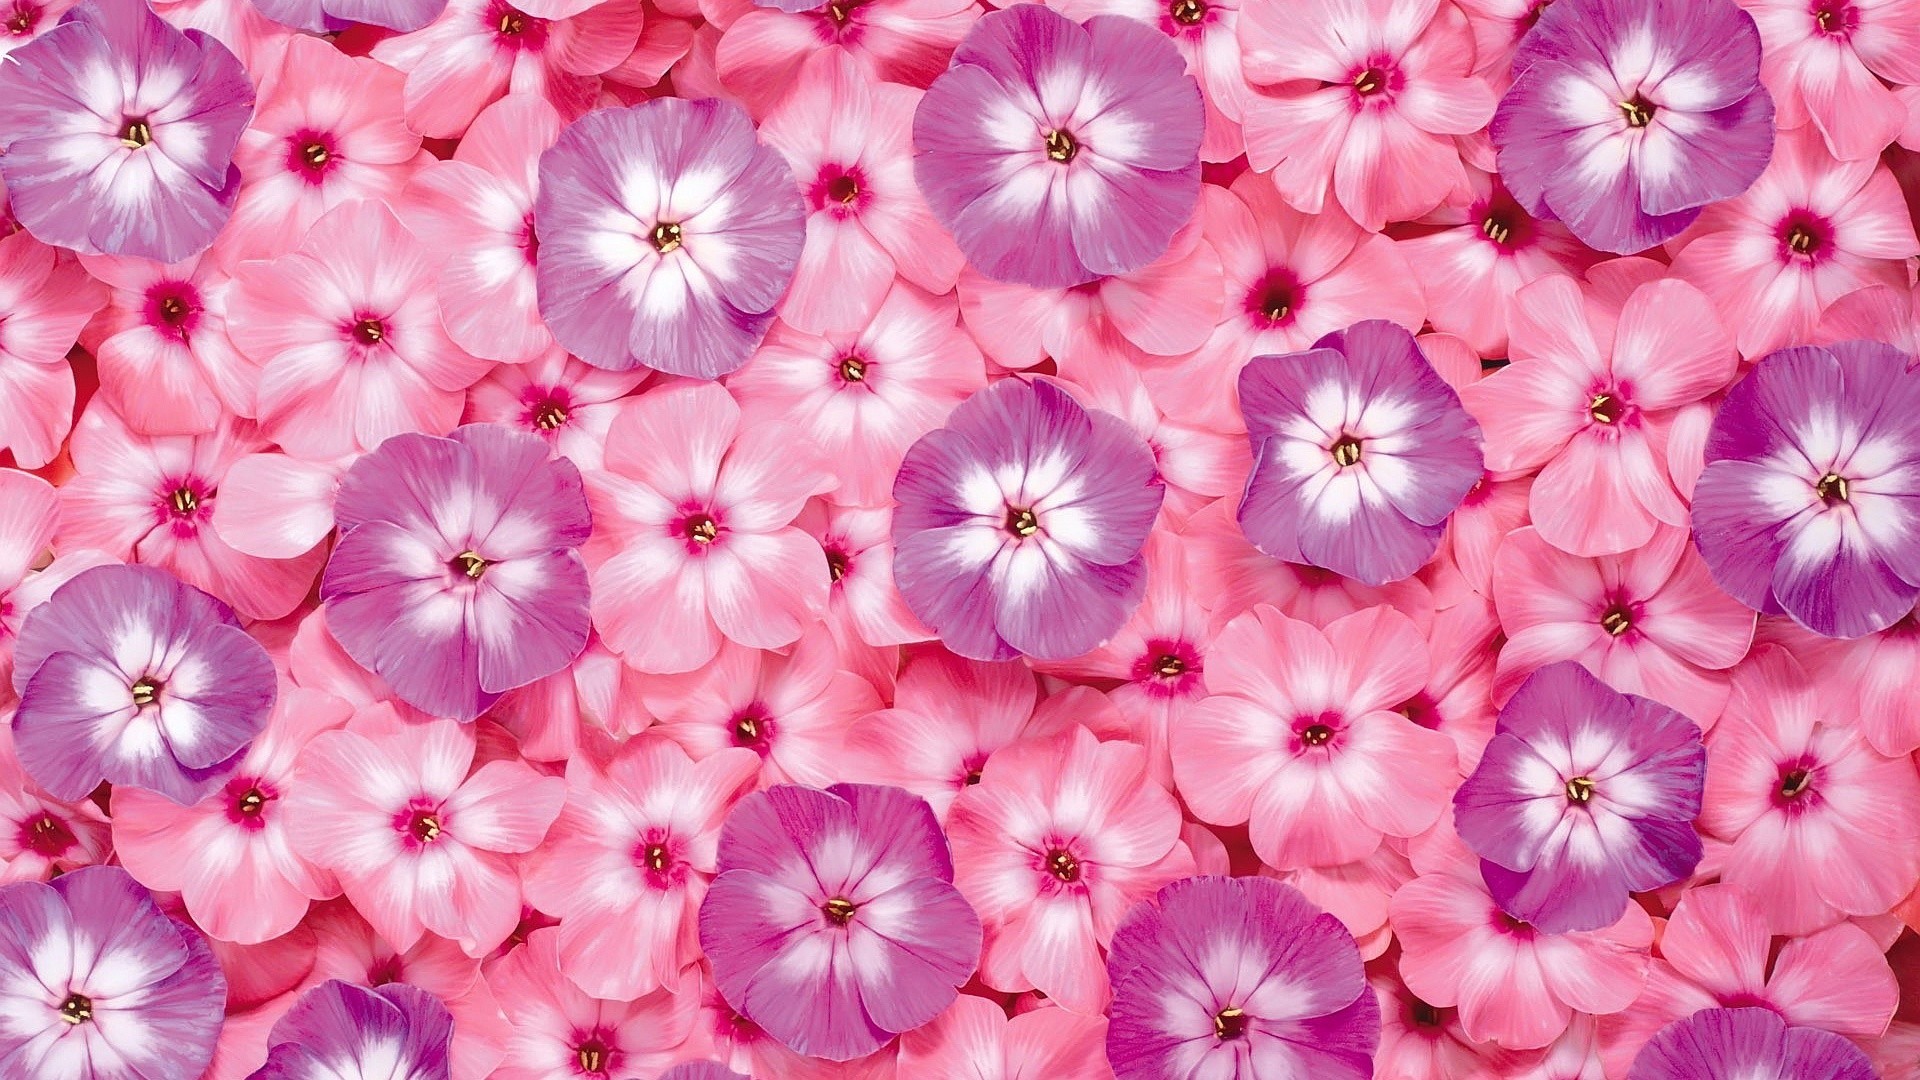 1920x1080  Pretty Pink Backgrounds - Wallpaper Cave Free Pink Flower  Wallpapers Hd Resolution ÃÂ« Long Wallpapers .